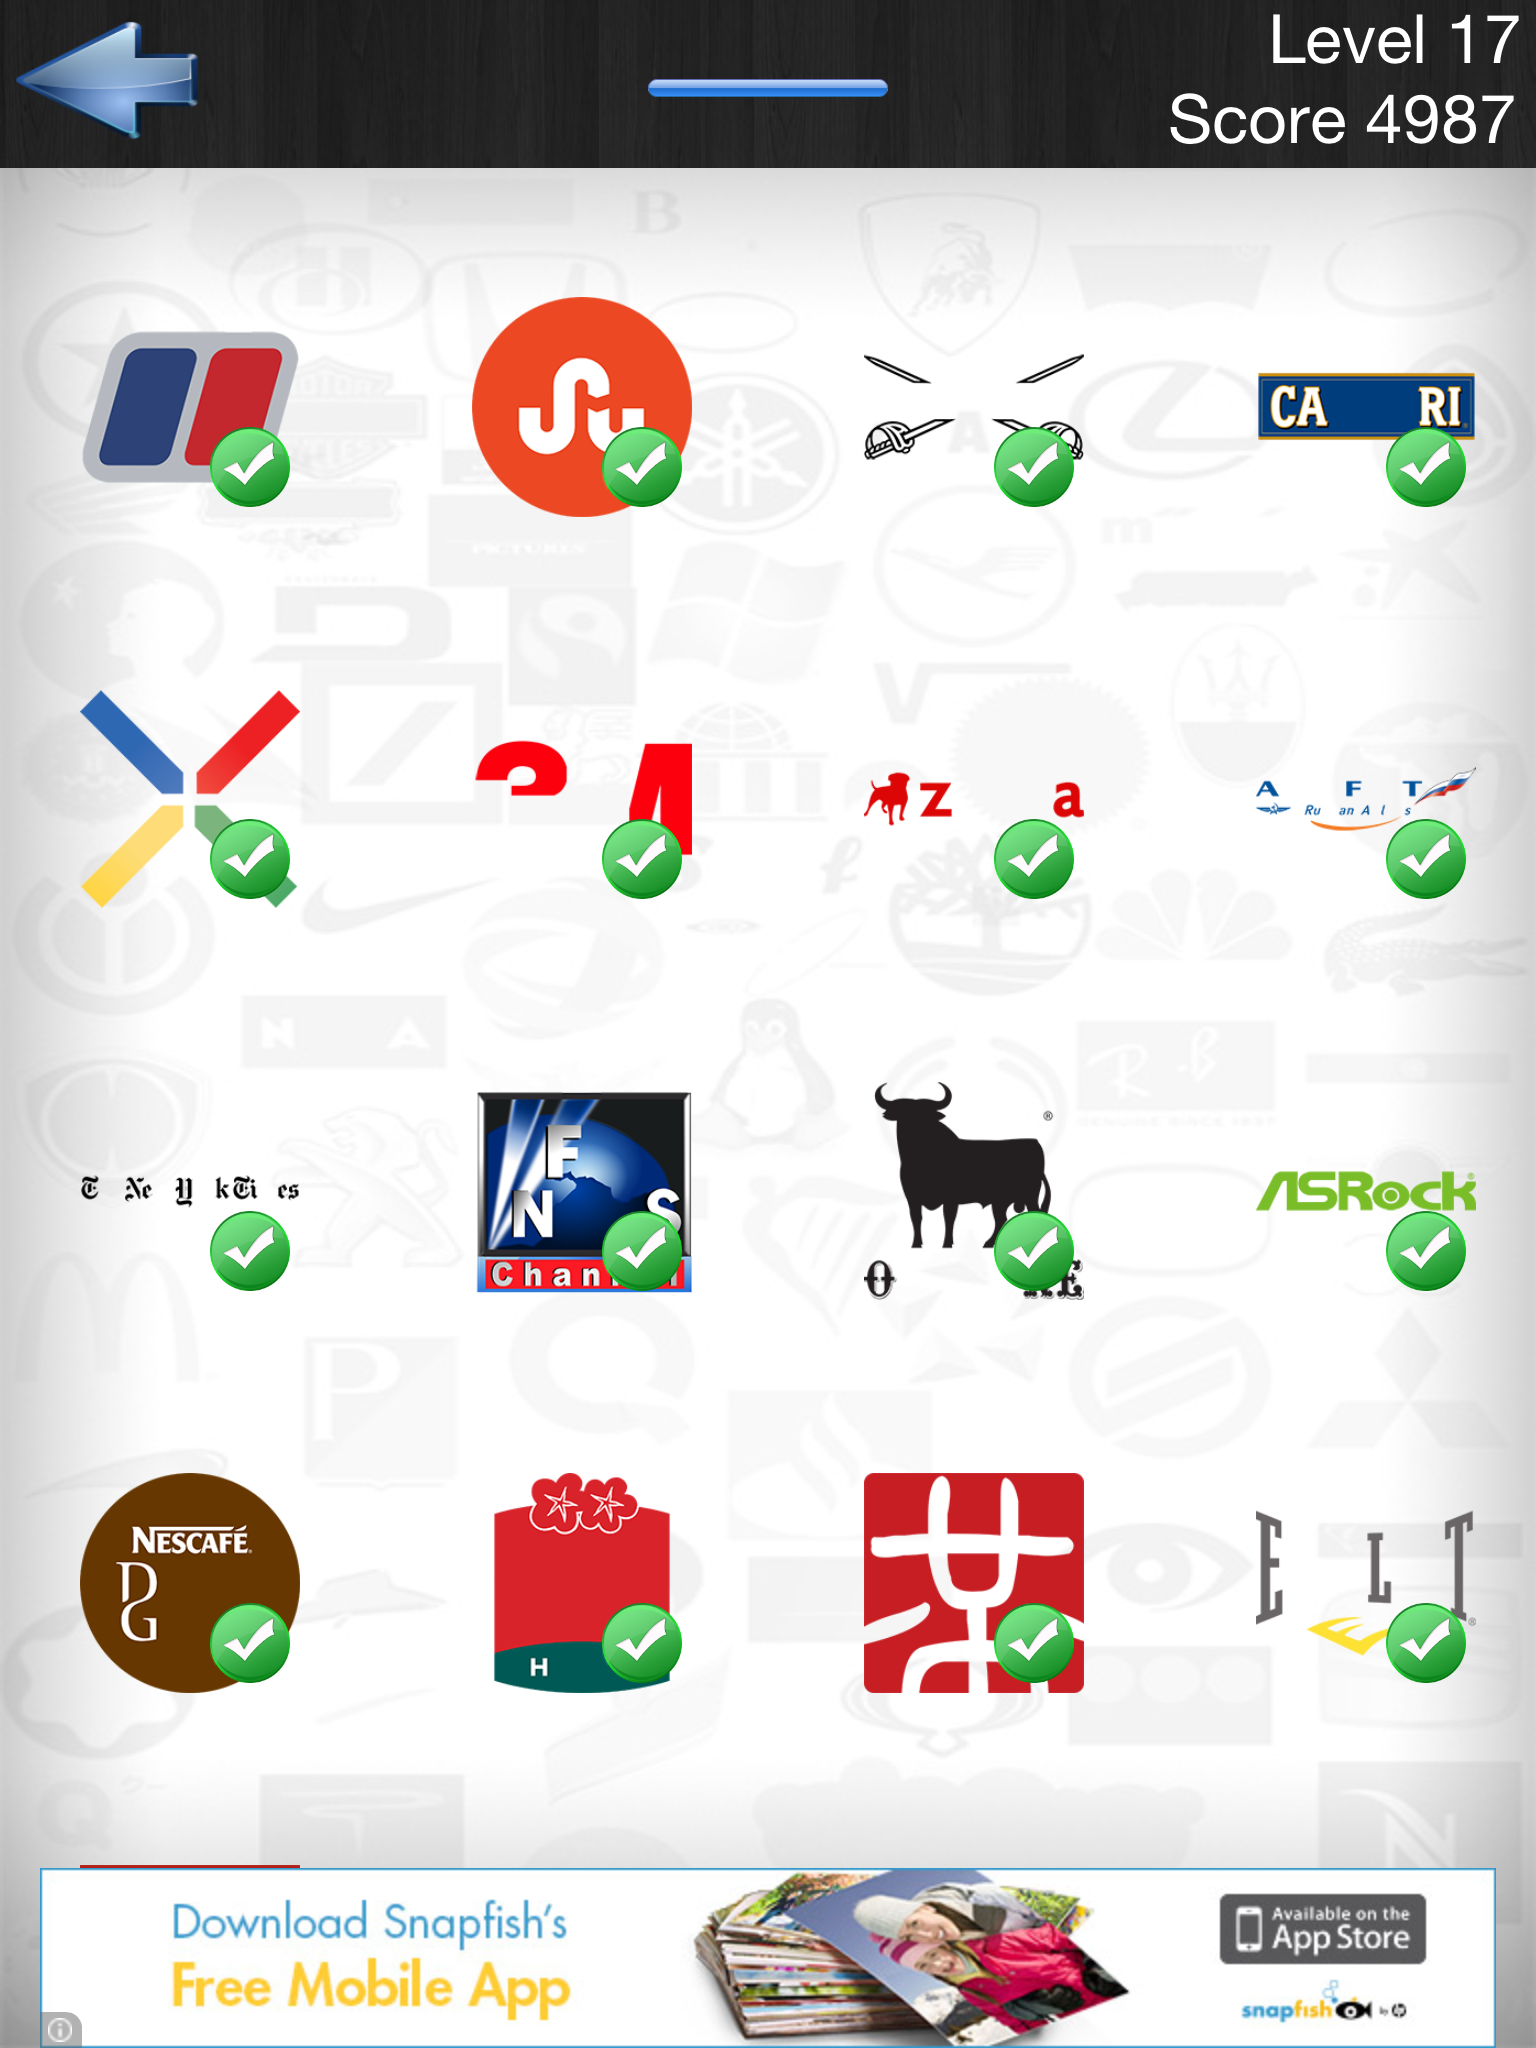 Logo quiz androidcrowd level 11 answers